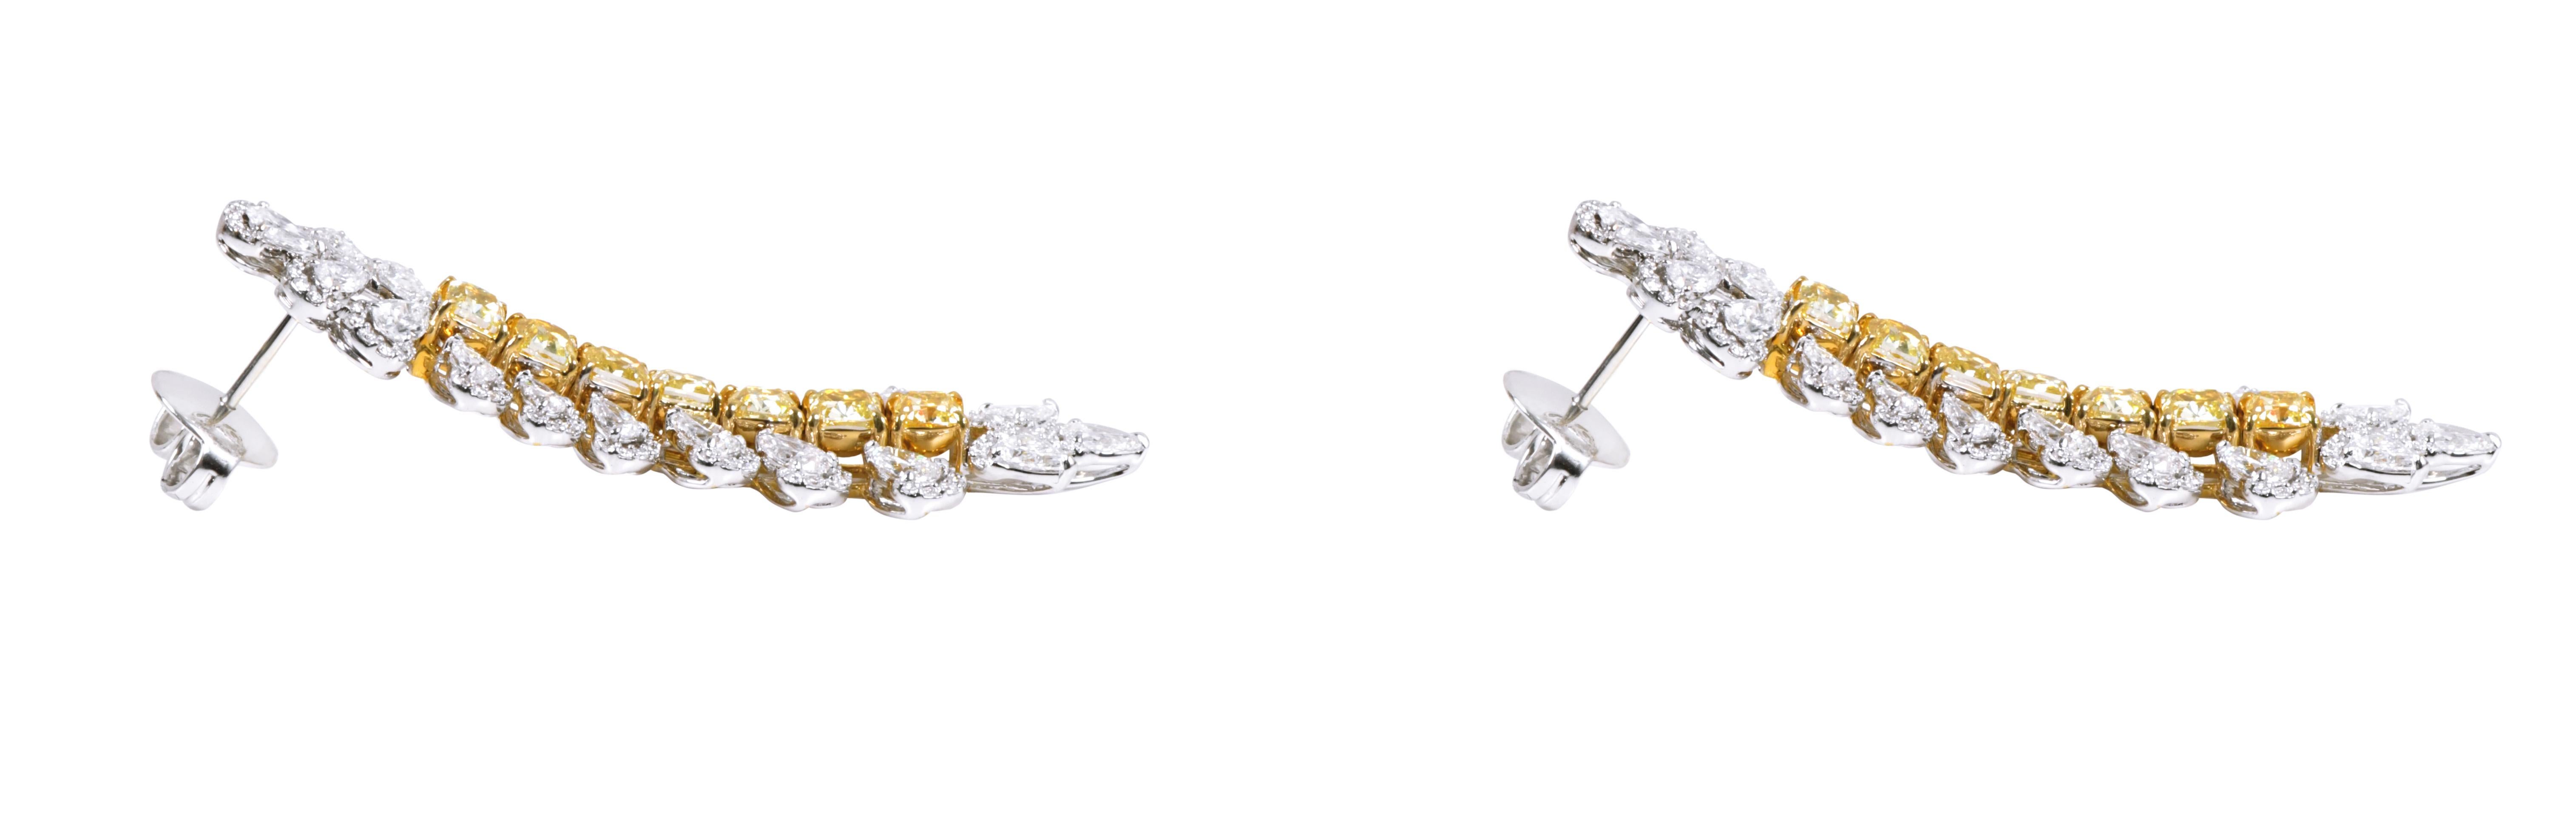 Women's 18 Karat Gold 13.31 Carat Yellow and White Diamond Solitaires Cocktail Earrings For Sale